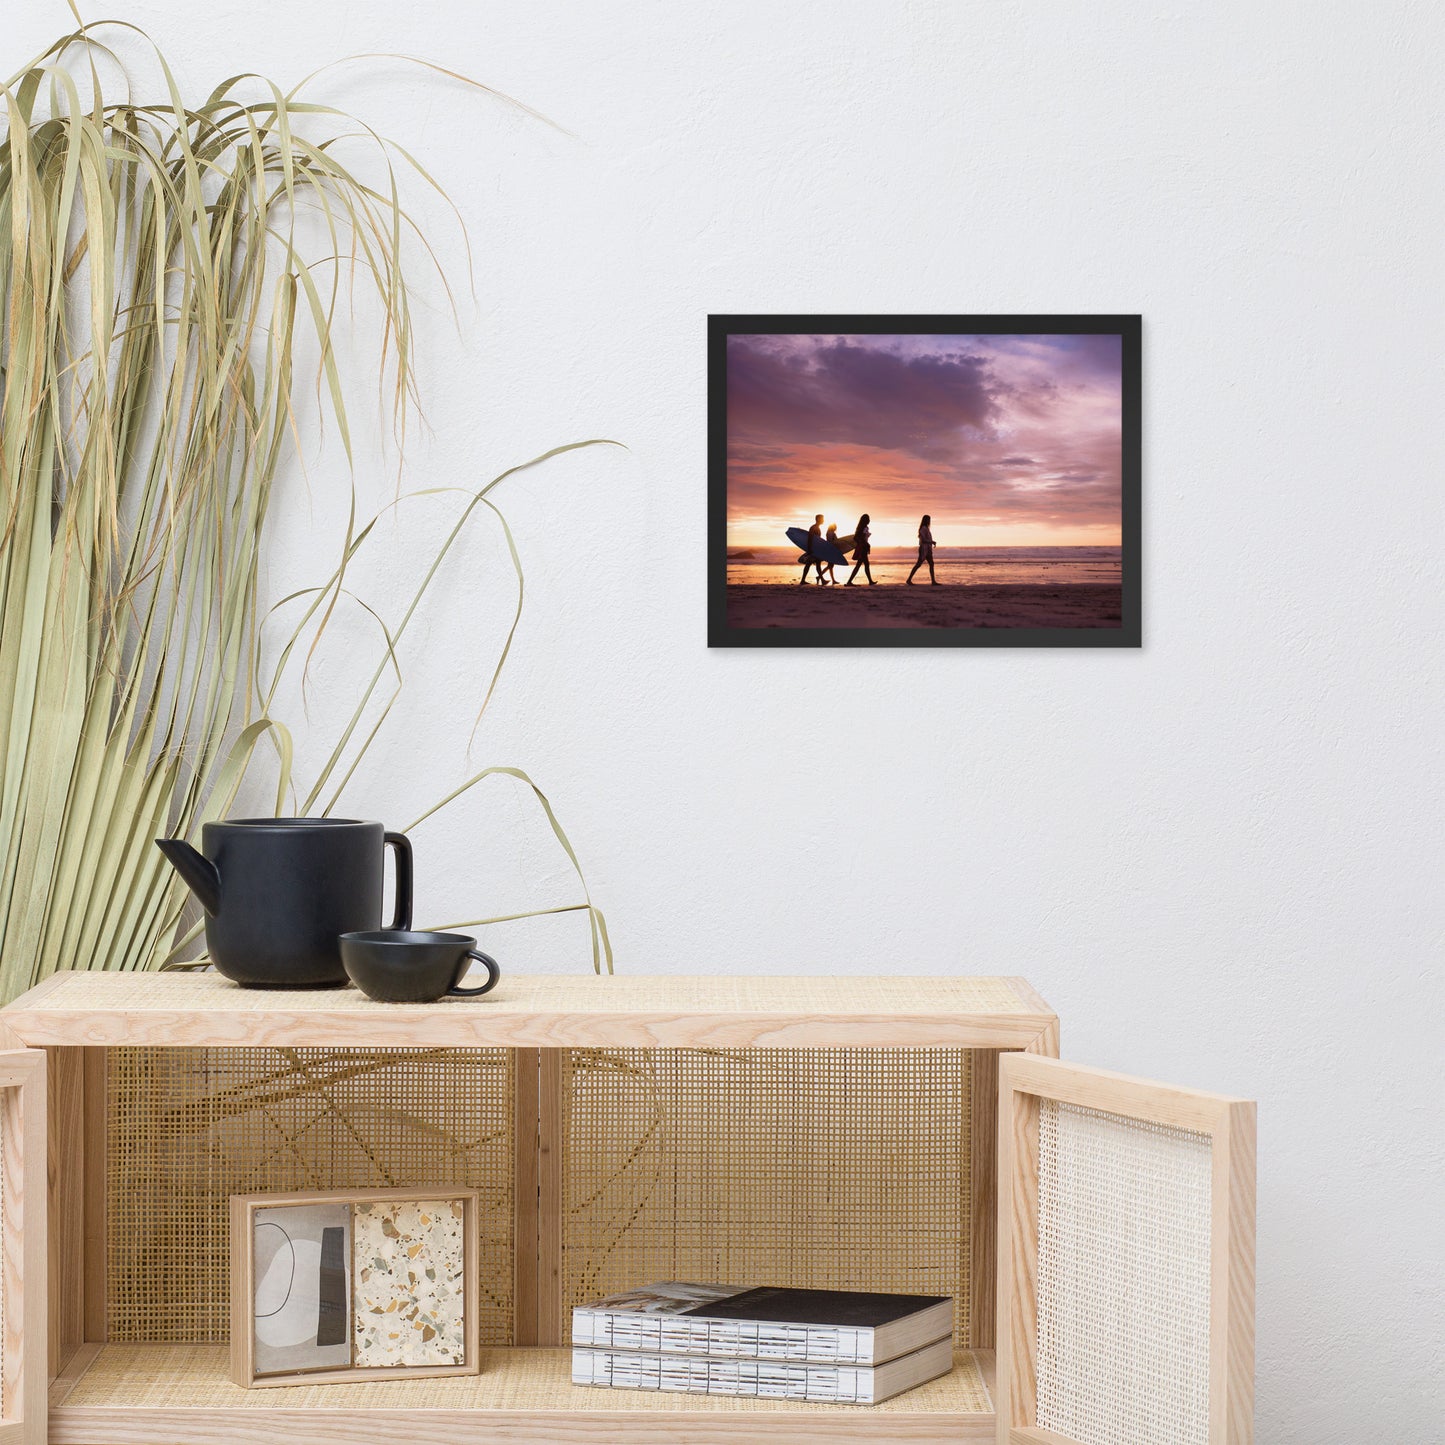 Surfers and Sunset on the Shore Coastal Landscape Lifestyle Photograph Framed Wall Art Print